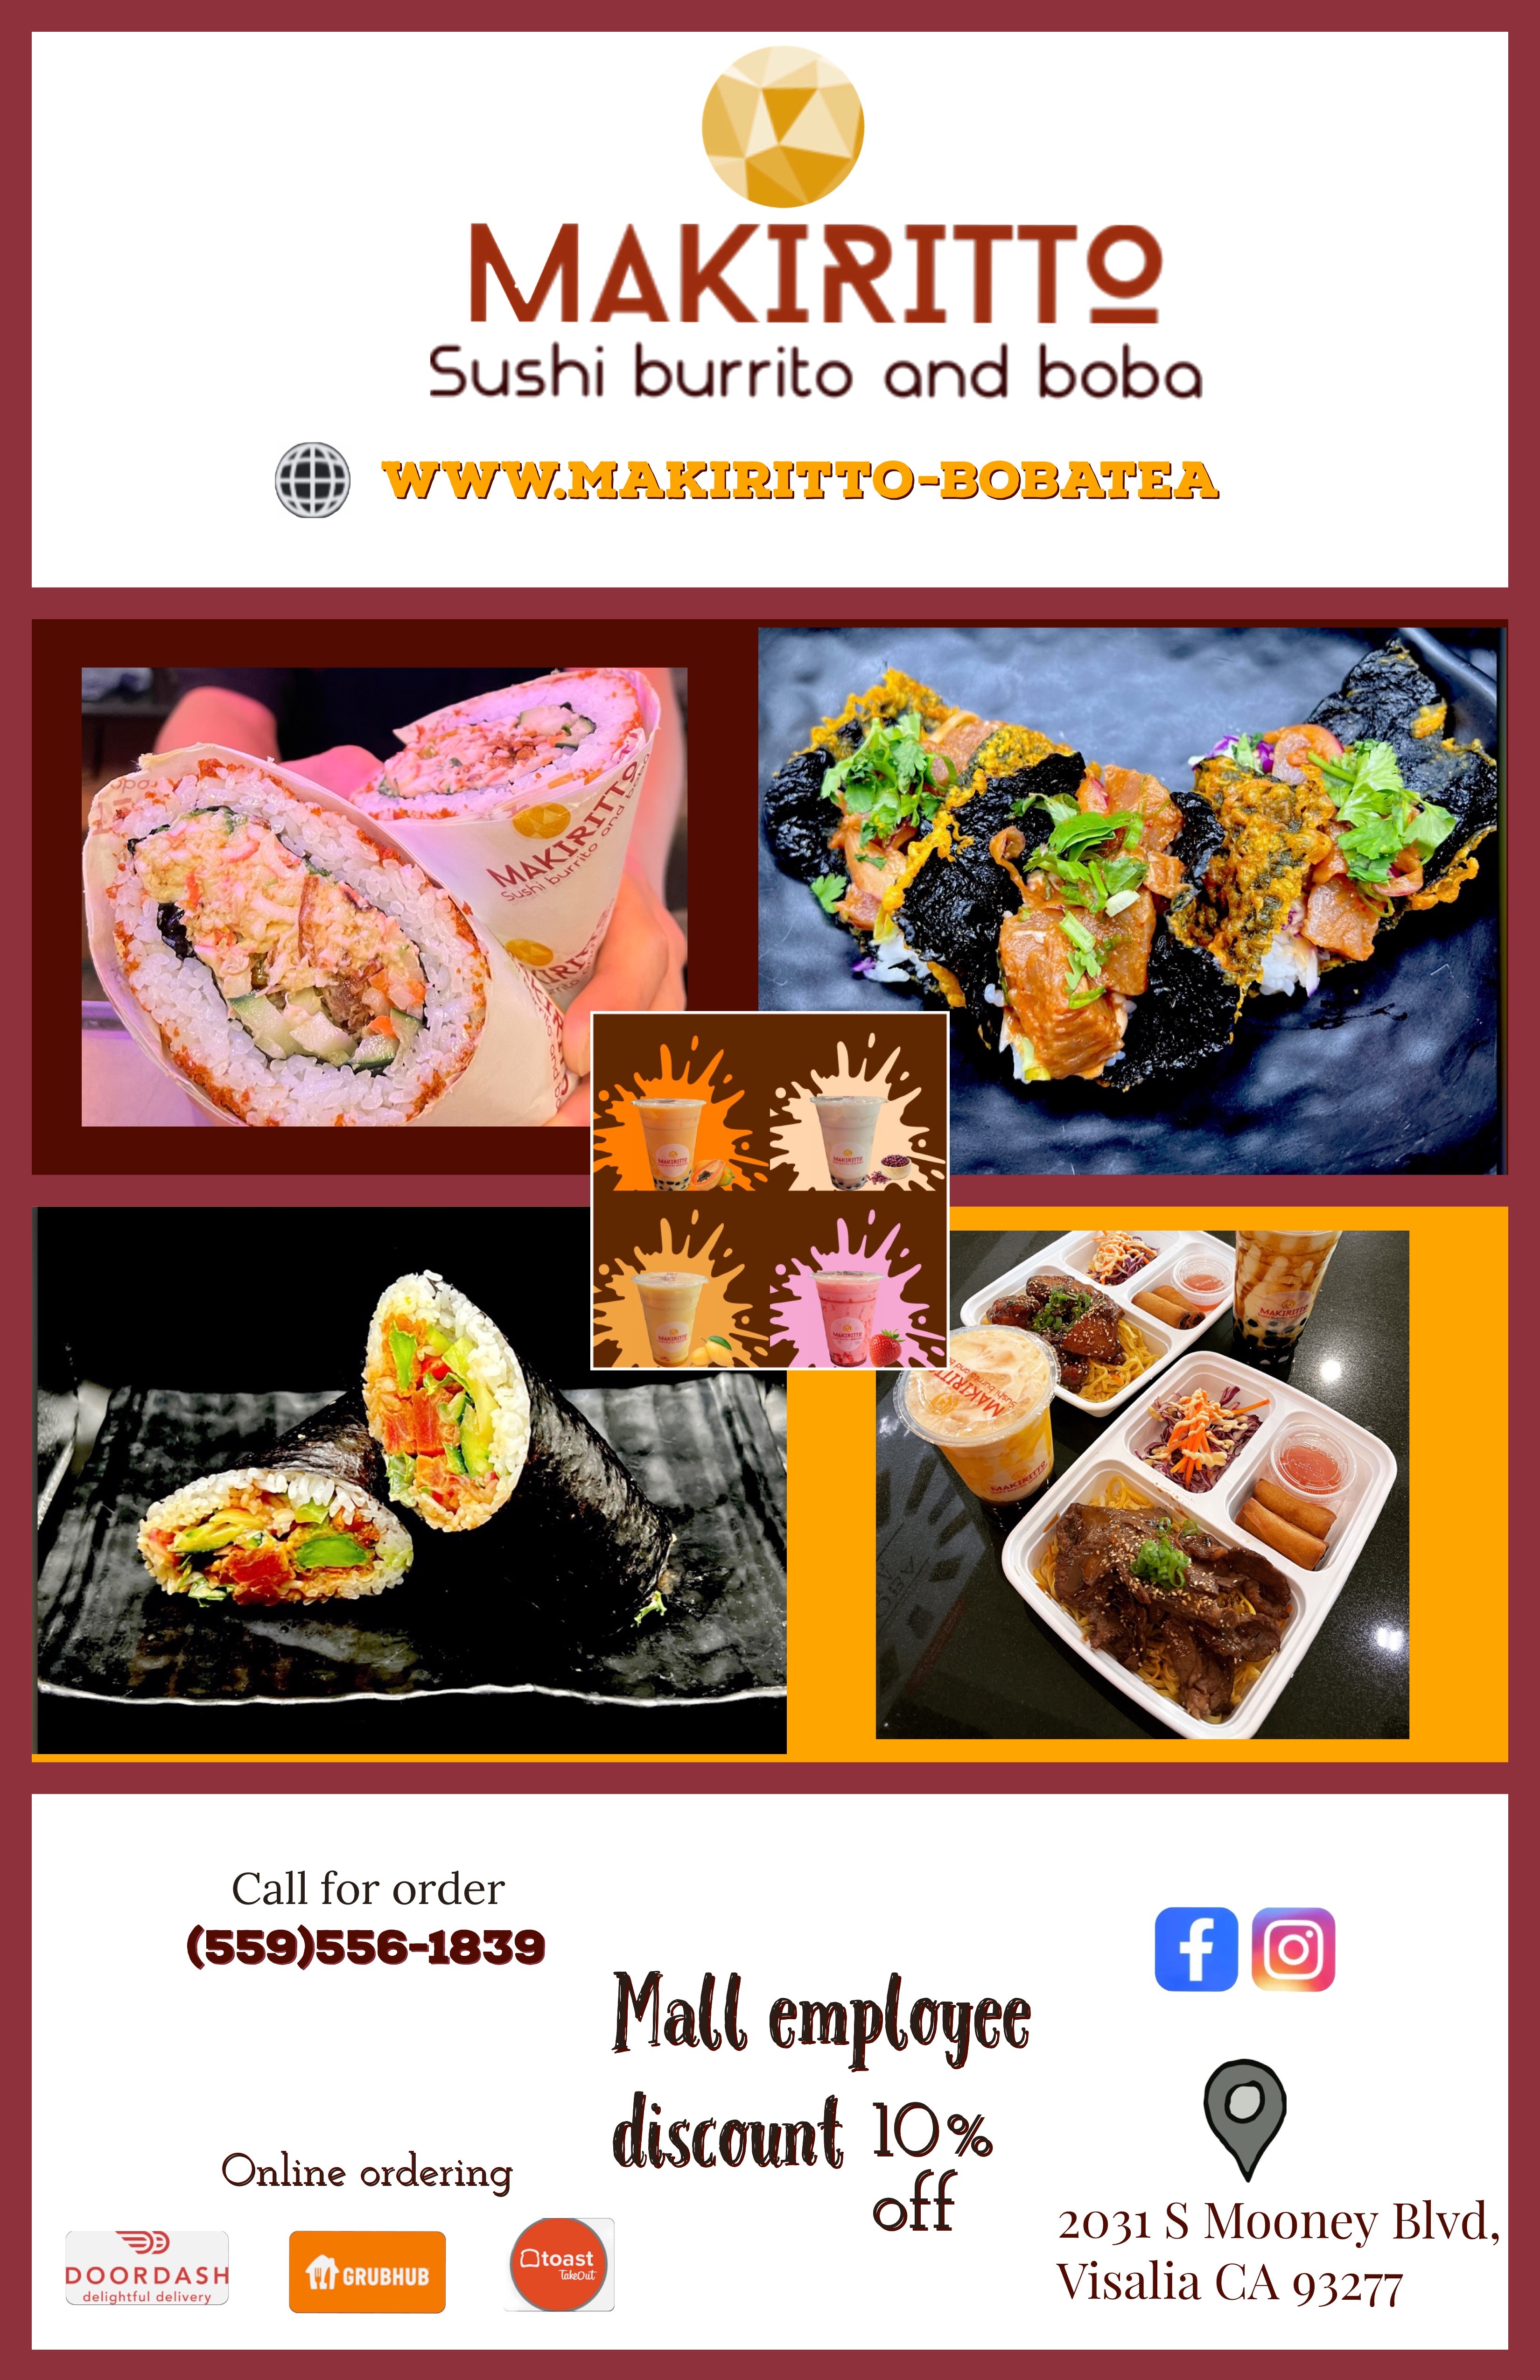 Sushi burritos and the best boba in town! from Makiritto